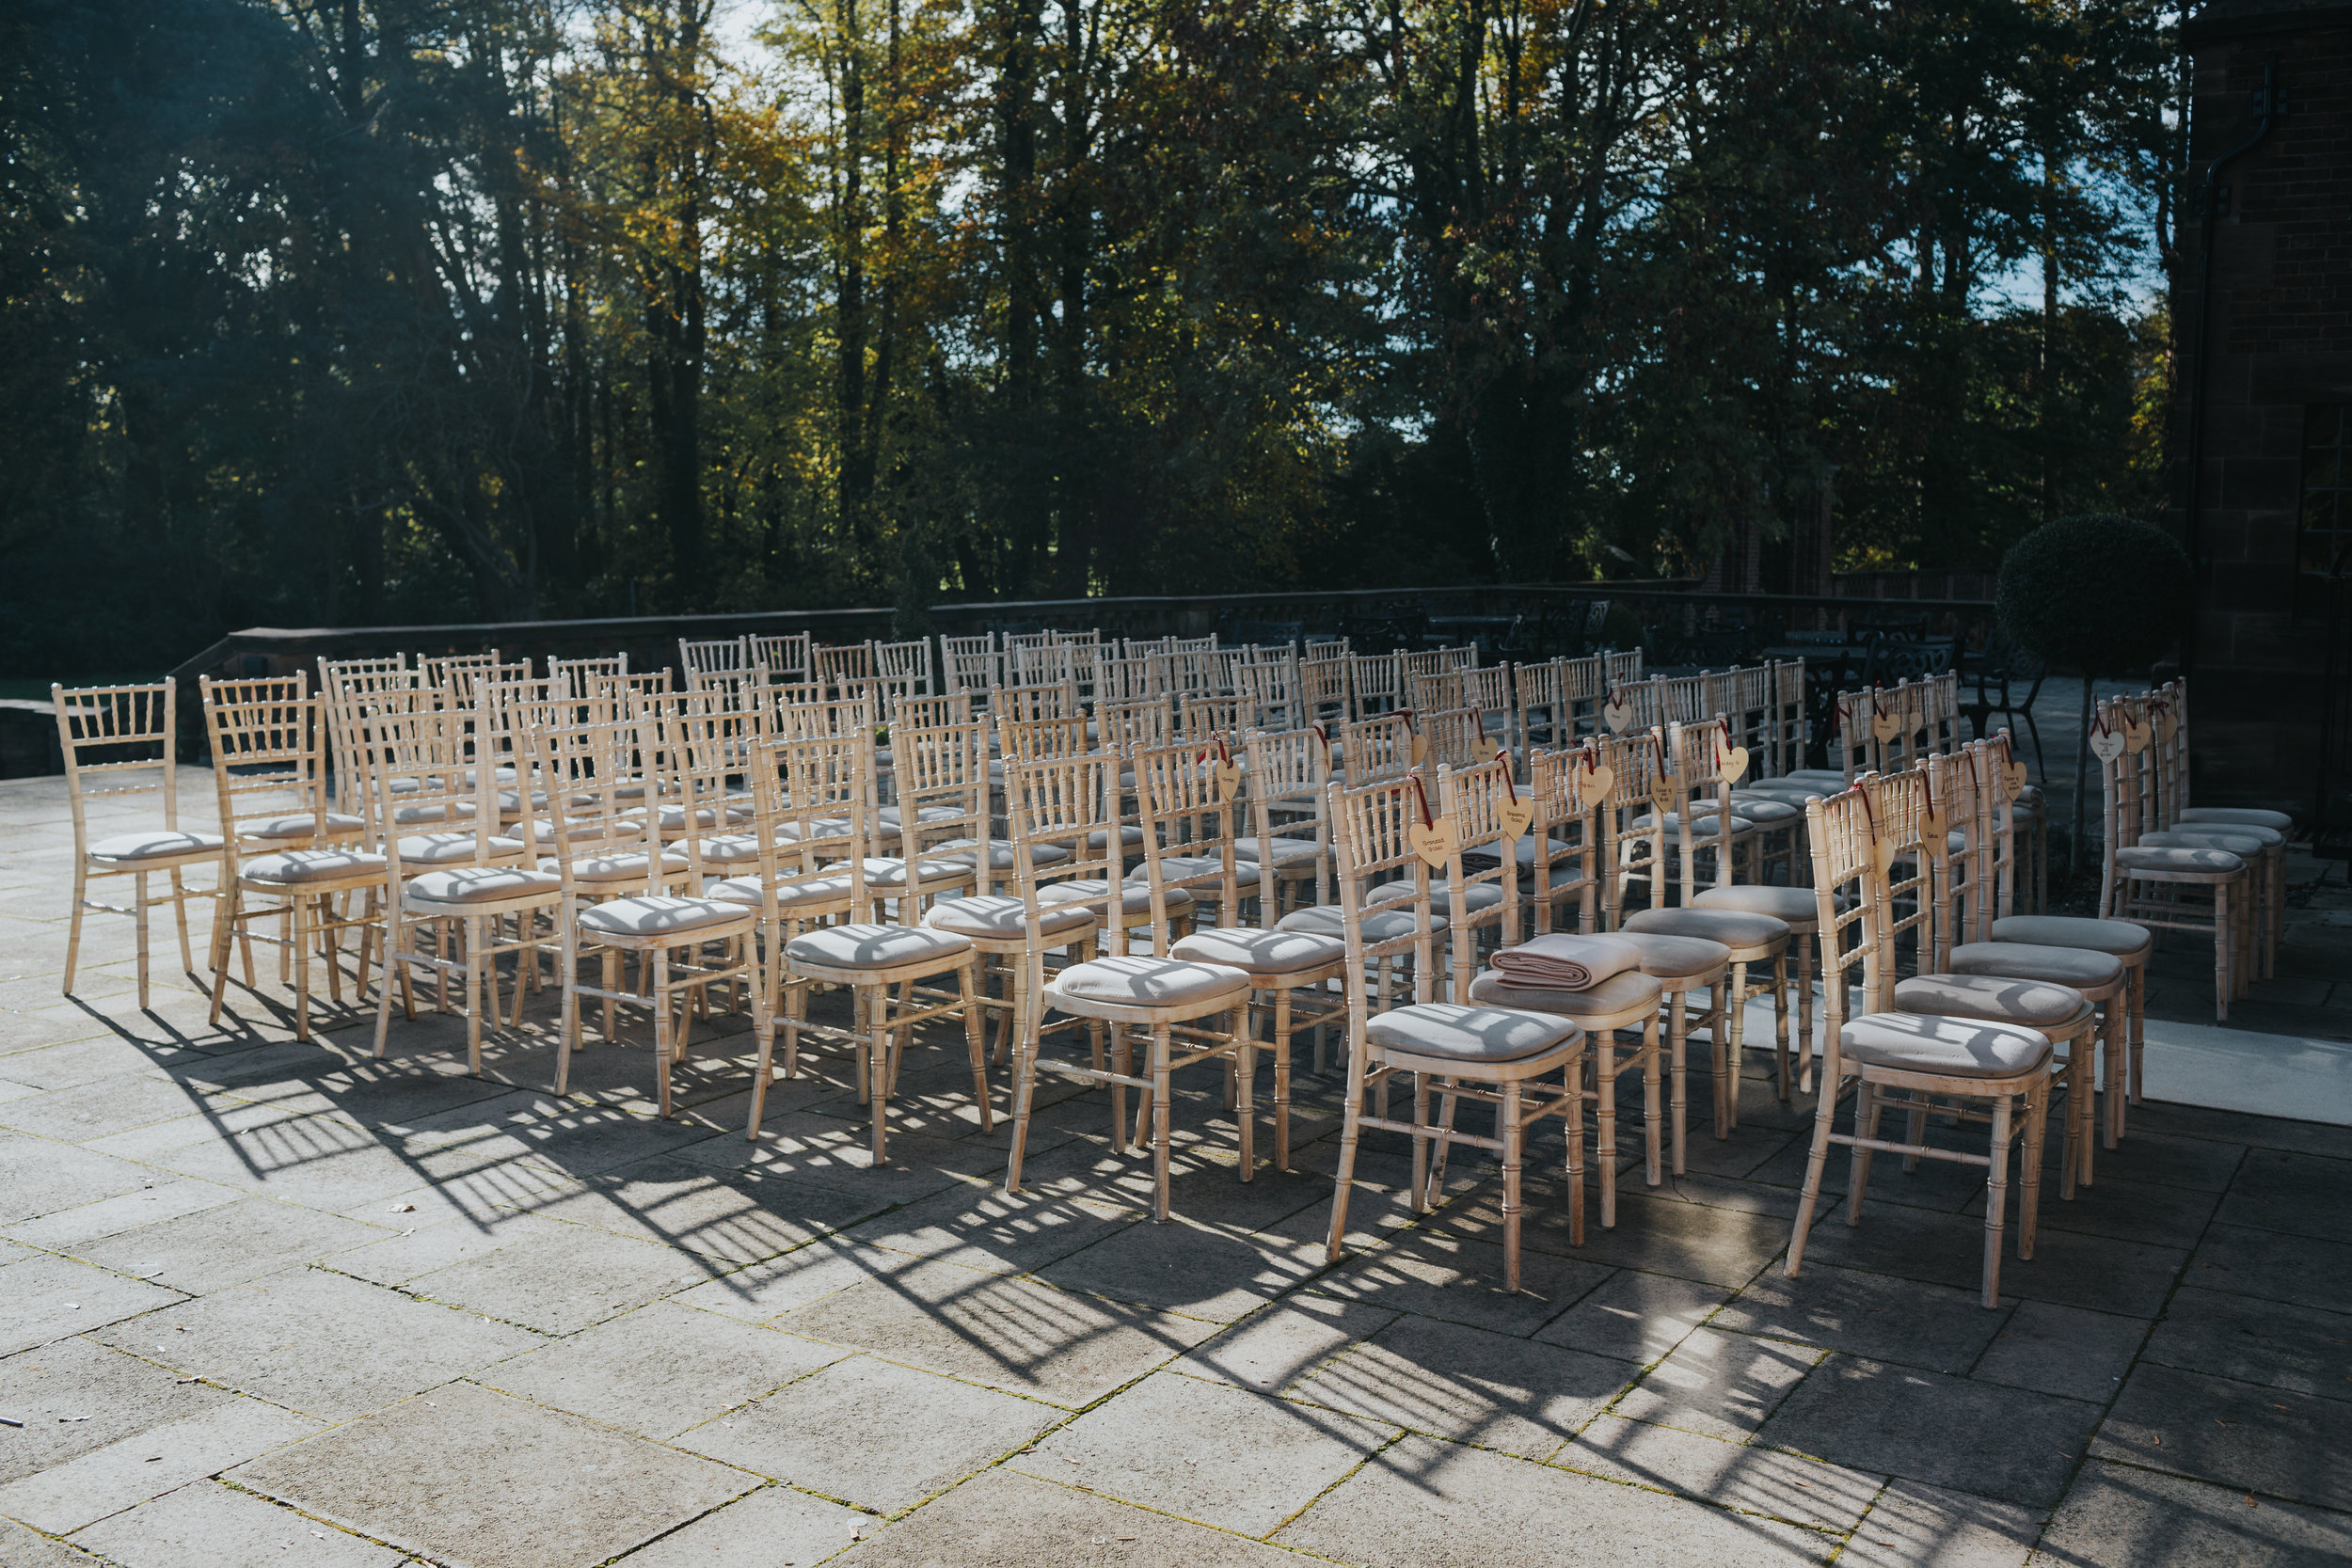 Empty cream wooden wedding chairs, sit empty in the sunlight casting shadows on patio awaiting the wedding guests. 